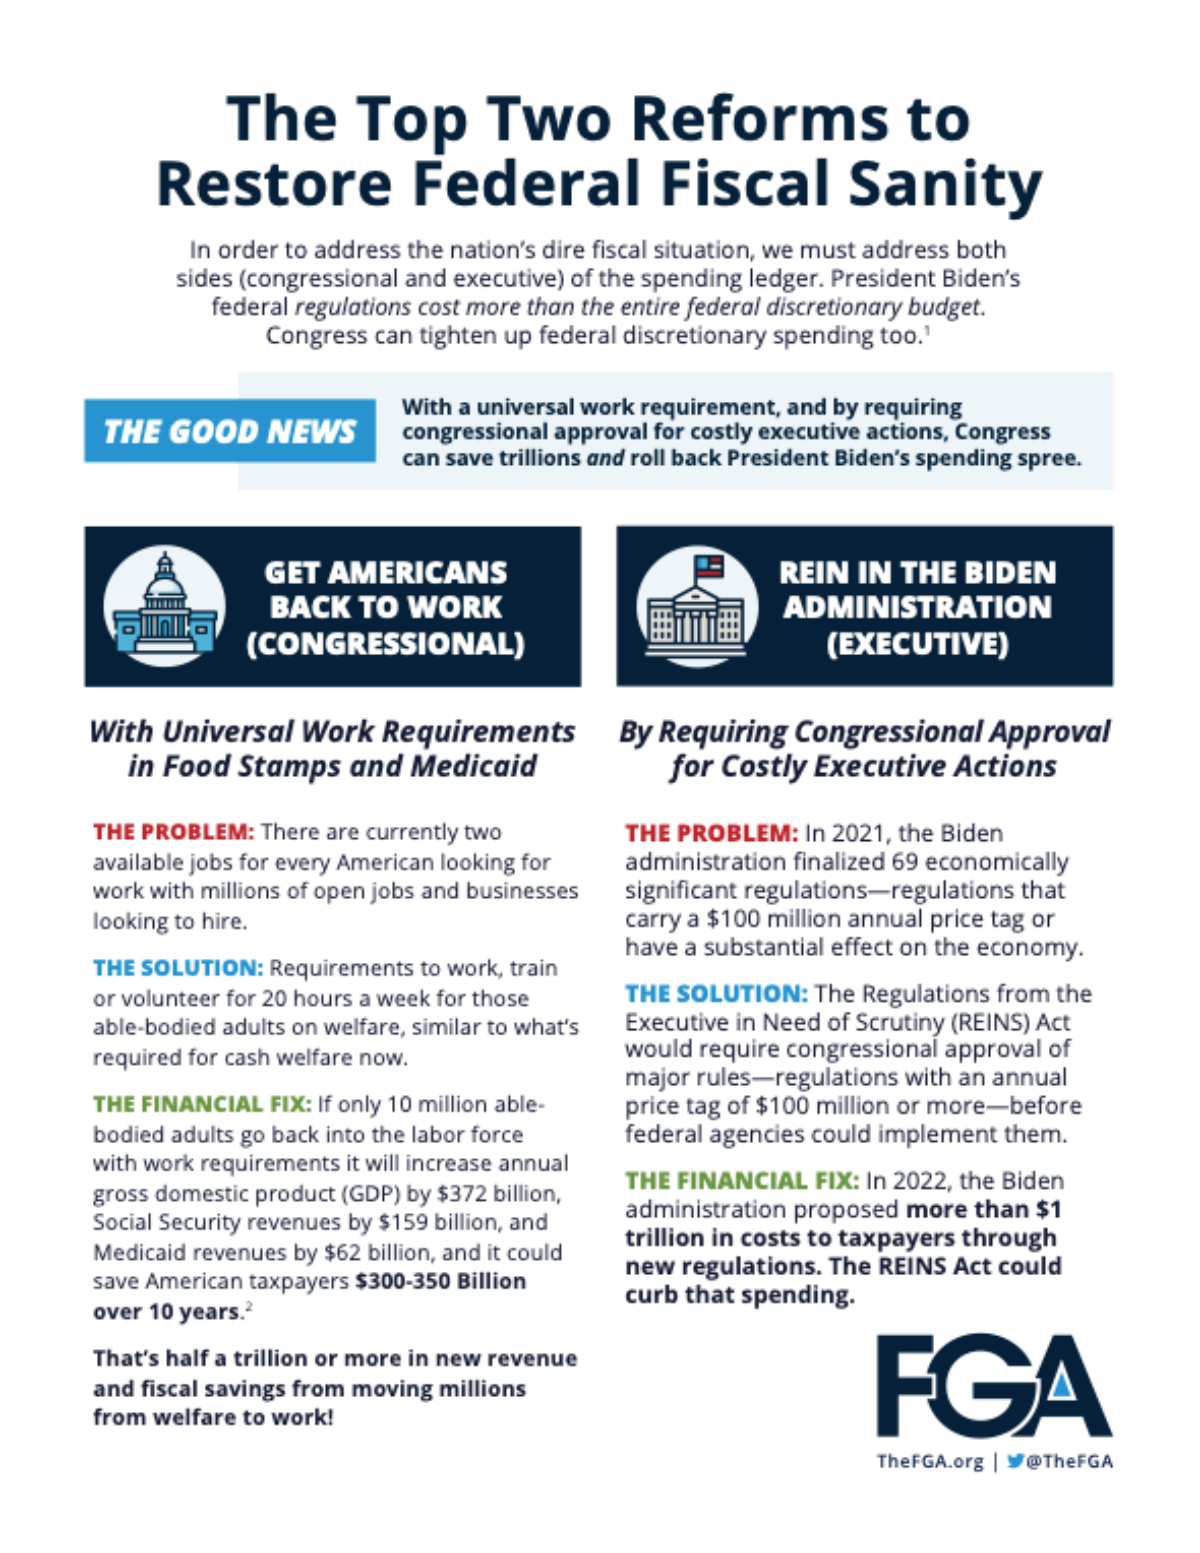 The Top Two Reforms to Restore Federal Fiscal Sanity